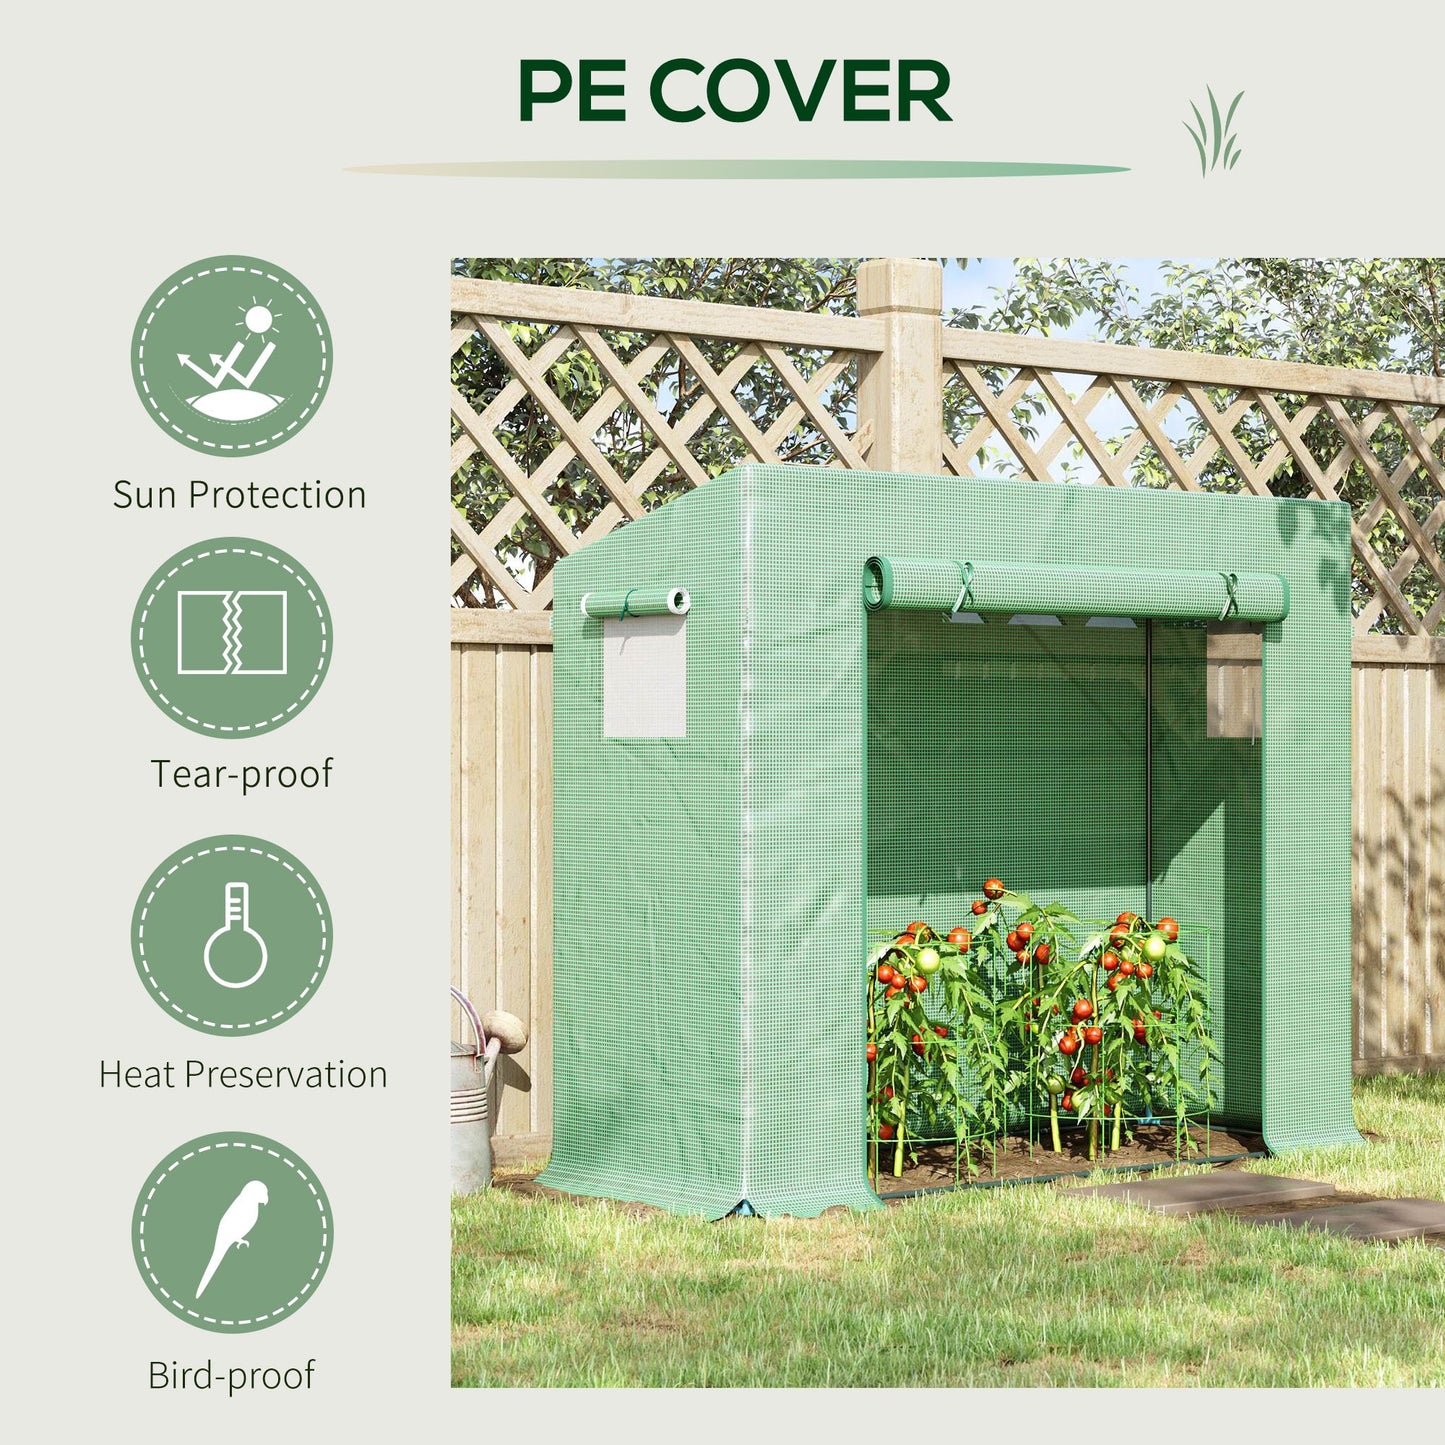 Outsunny Garden Greenhouse with PE Plant Cover, Windows and Zipper Door for Fruit and Veg 198L x 77W x 149-168H cm